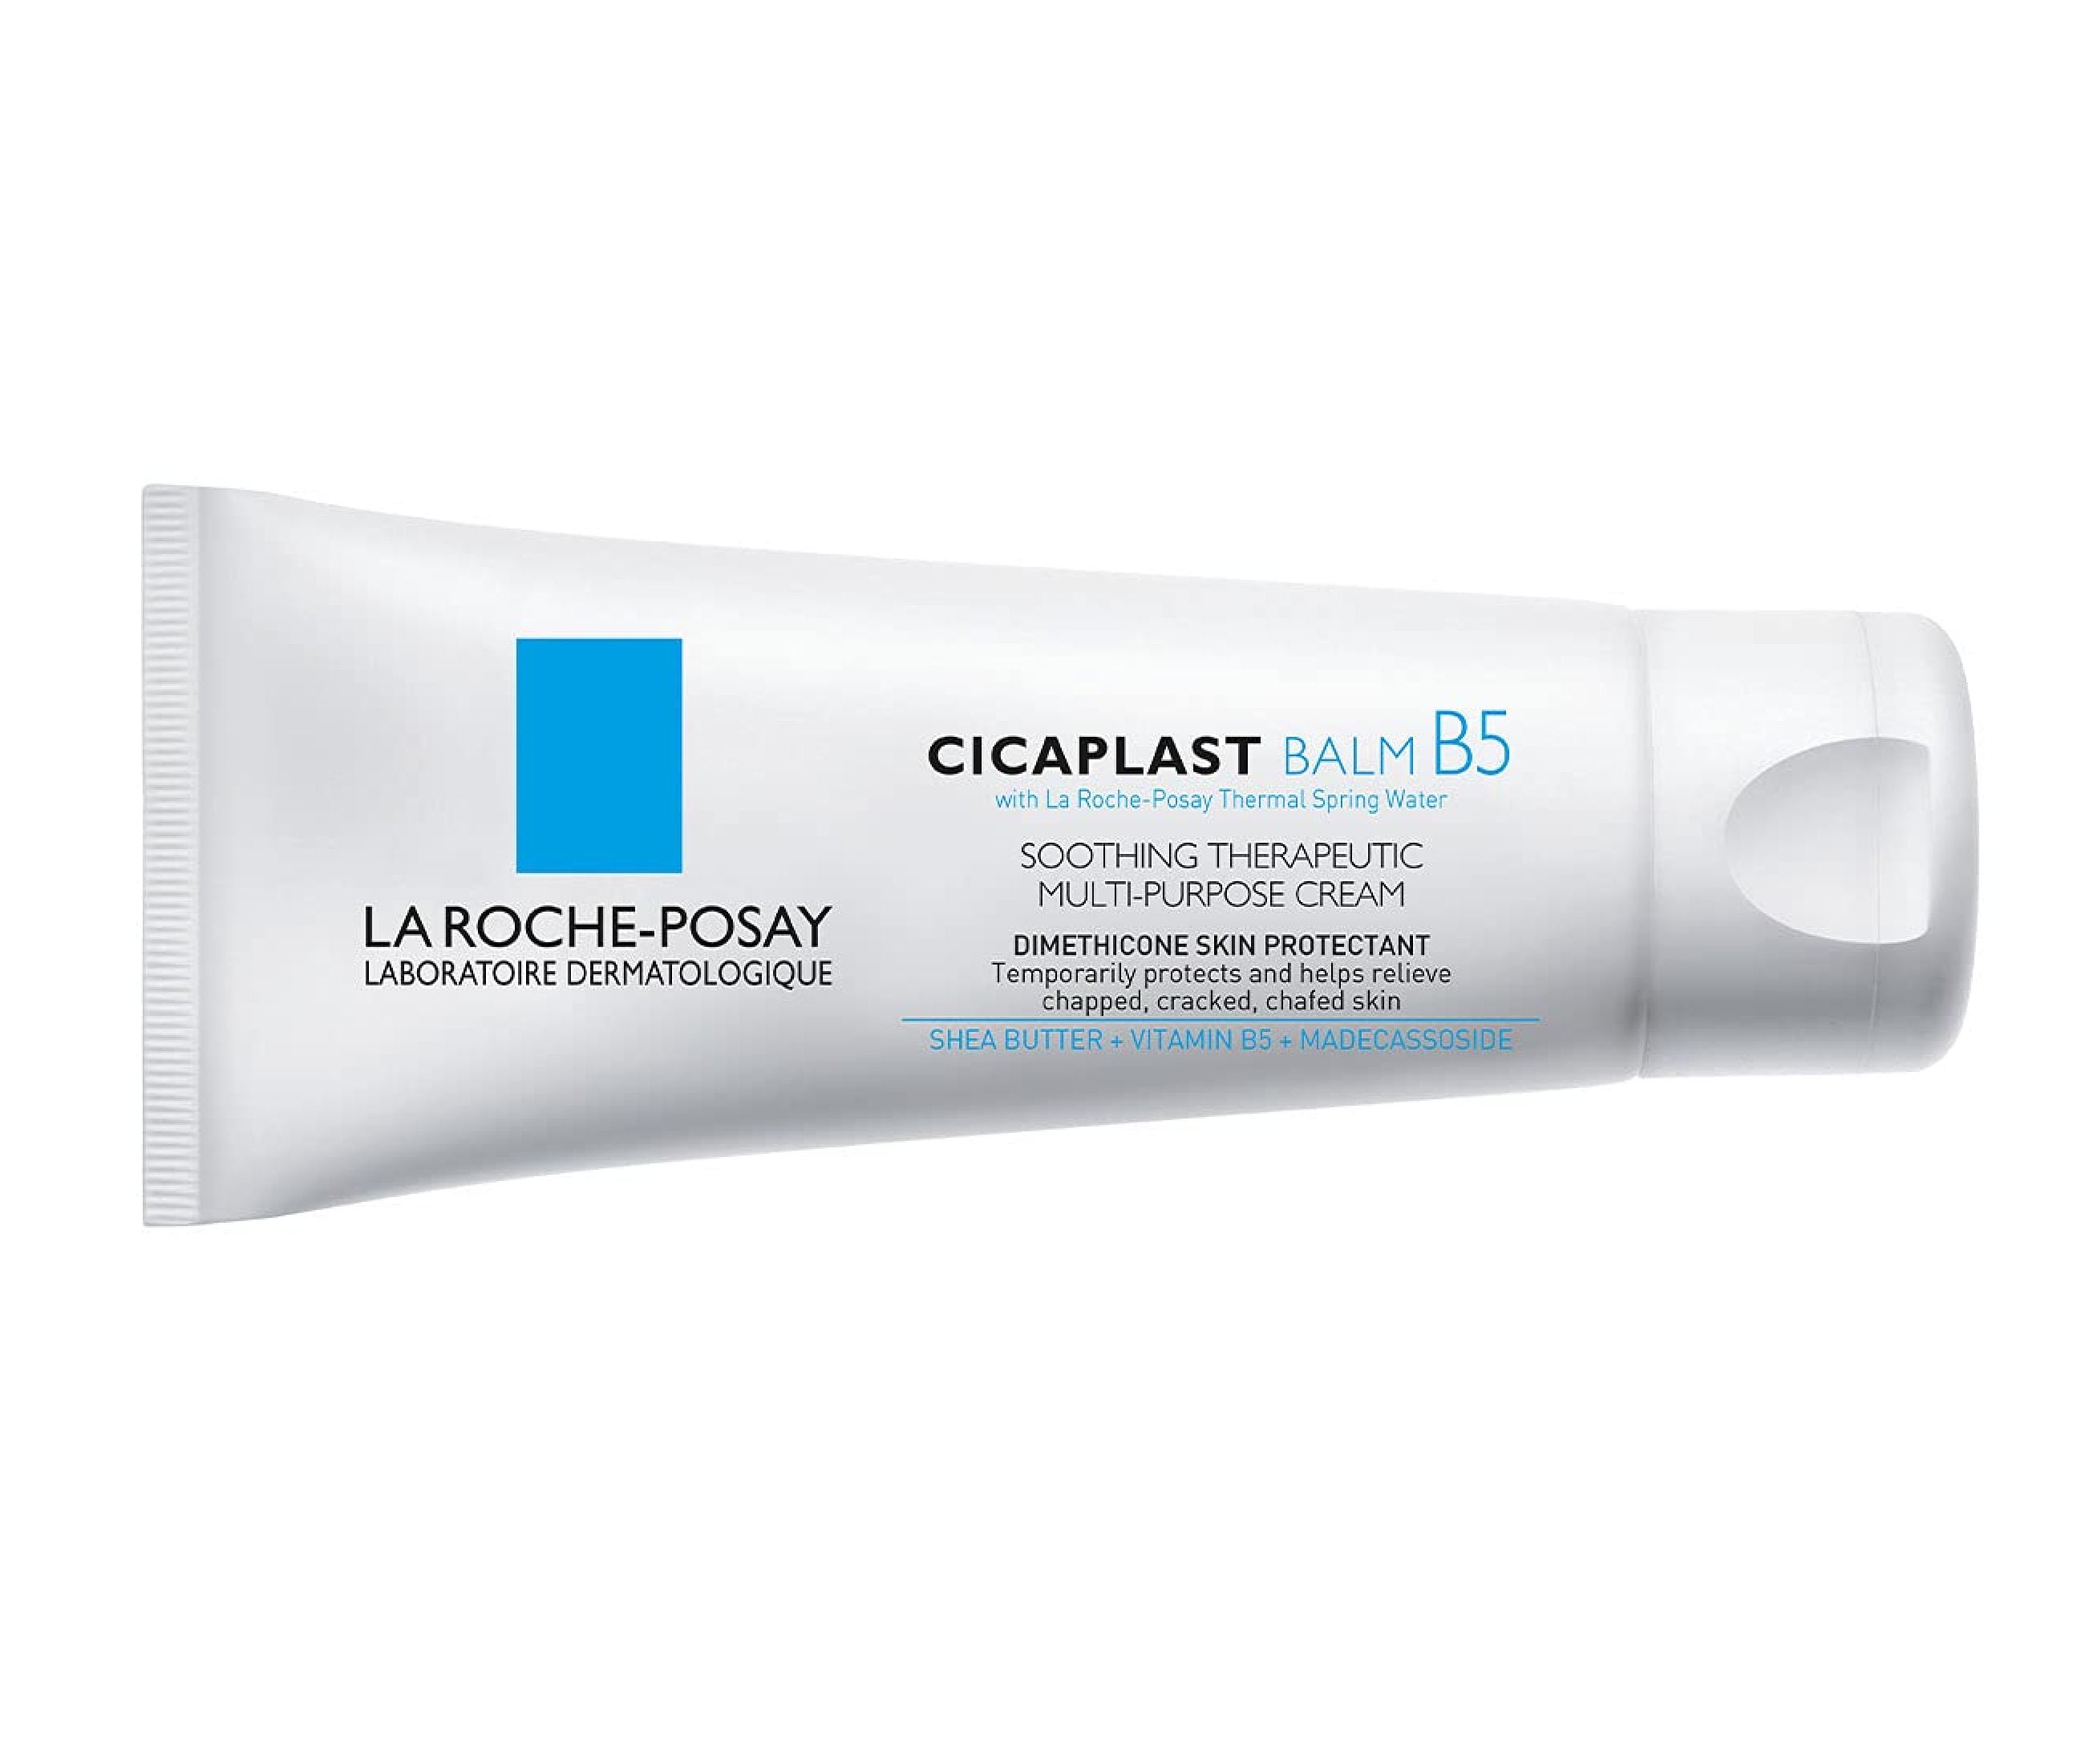 Generator overskud detekterbare La Roche-Posay Cicaplast Balm B5, Soothing Therapeutic Multi Purpose Cream  for Dry & Irritated Skin, Body and Hand Balm, Fragrance Free - Walmart.com